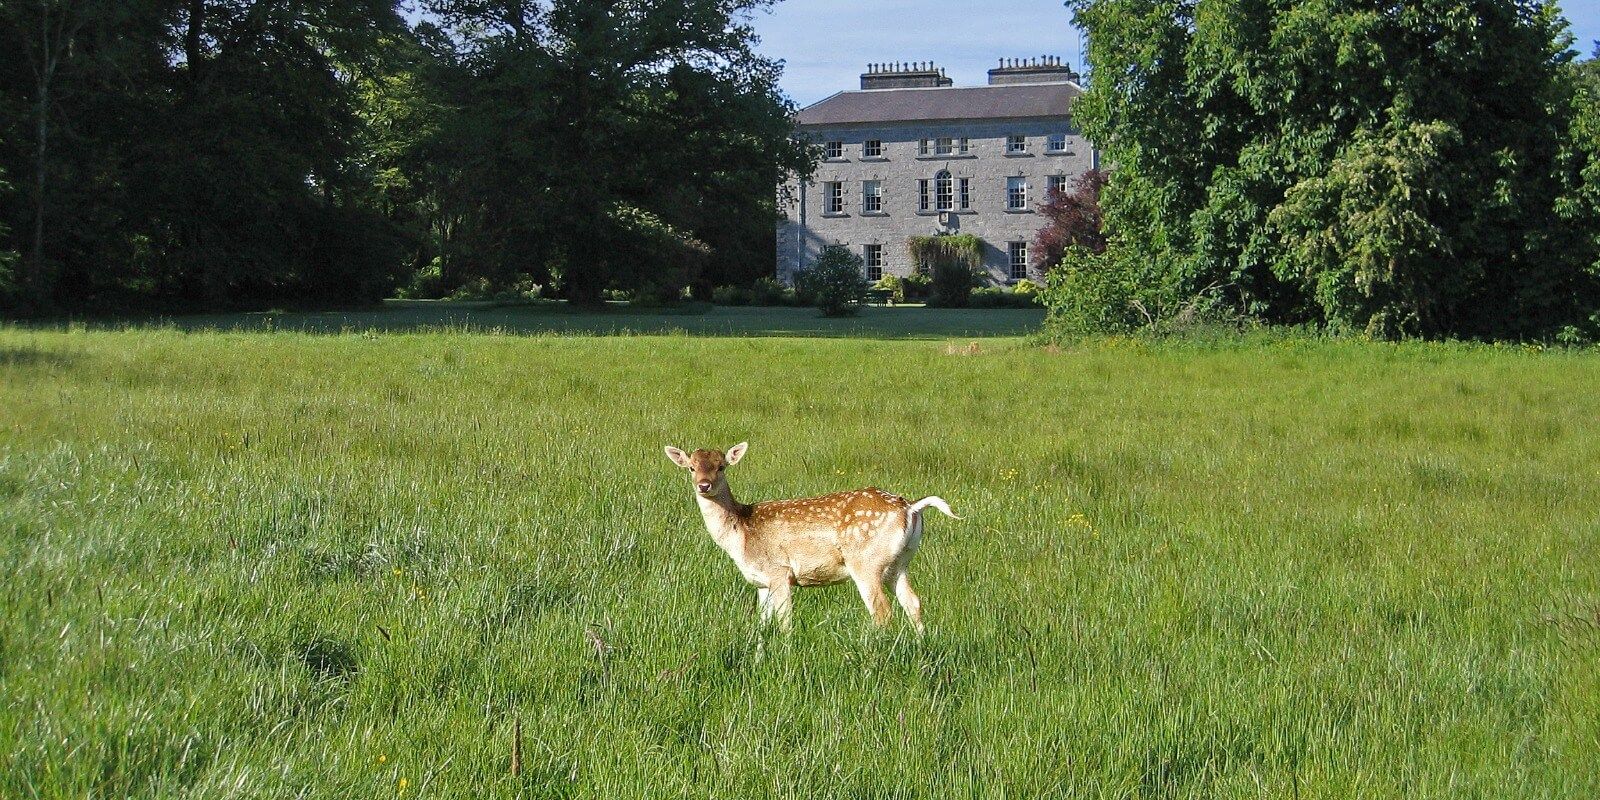 A wild deer at Coopershill